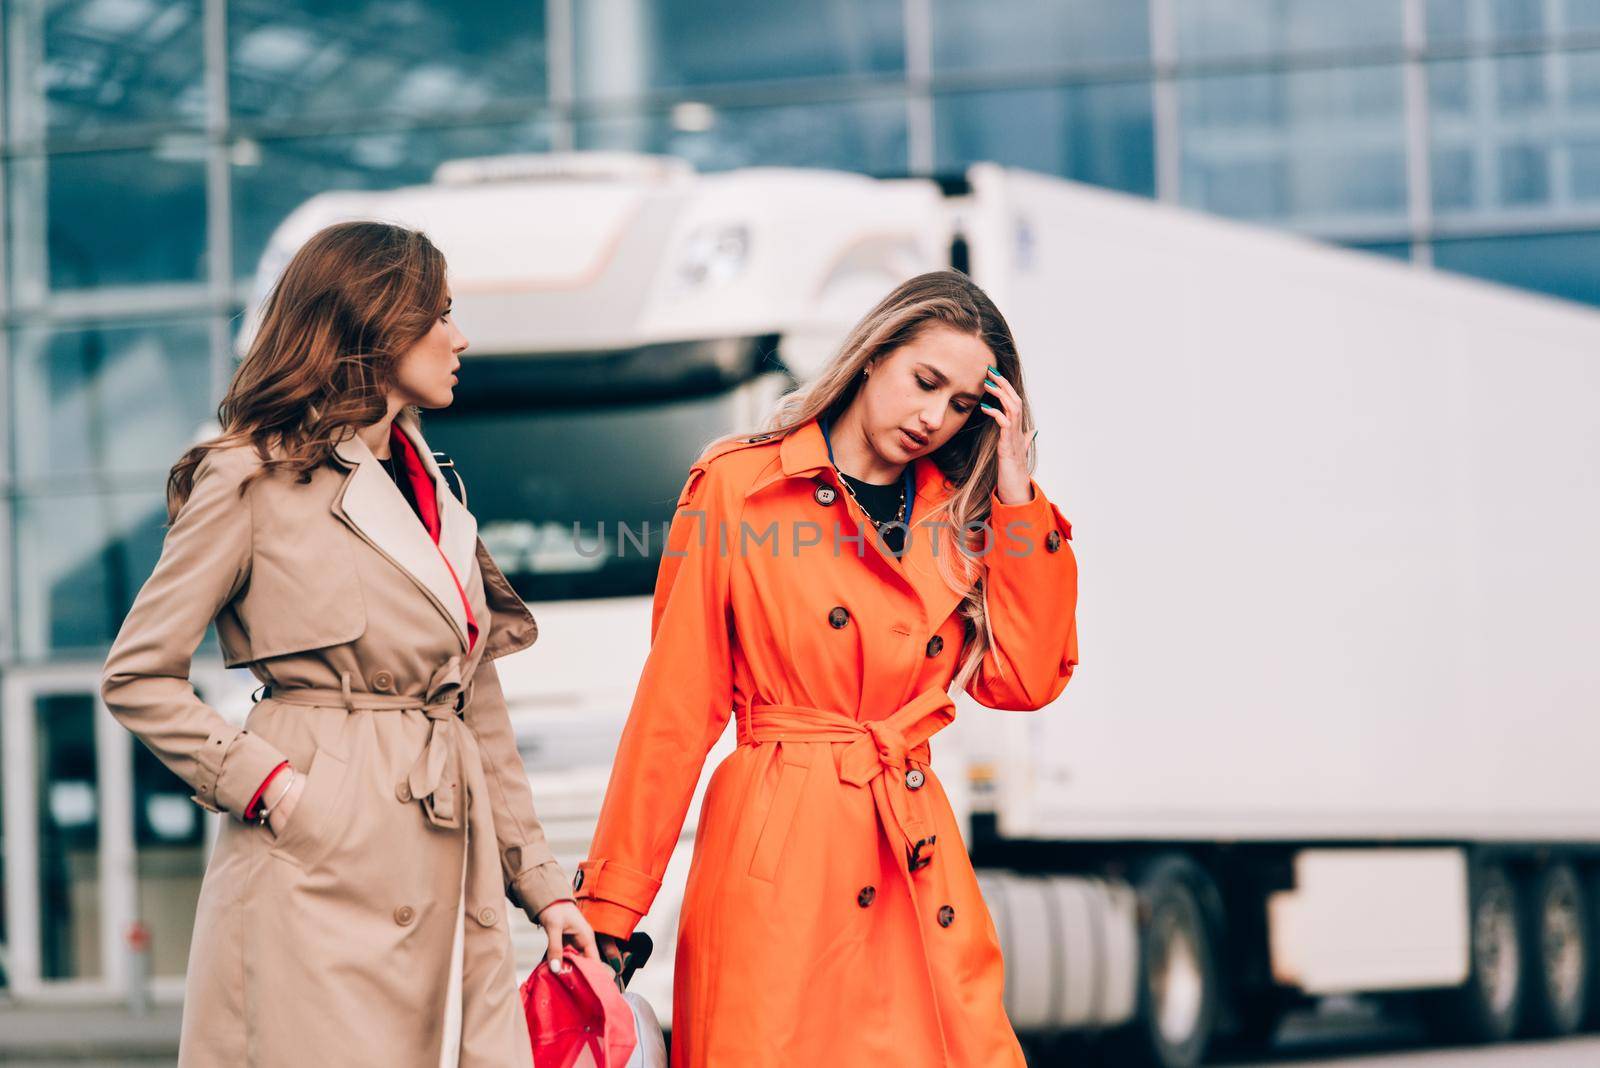 Two happy girls walking near airport, with luggage. Air travel, summer holiday. women dressed in trendy trenches orange and beige. Airport on a background